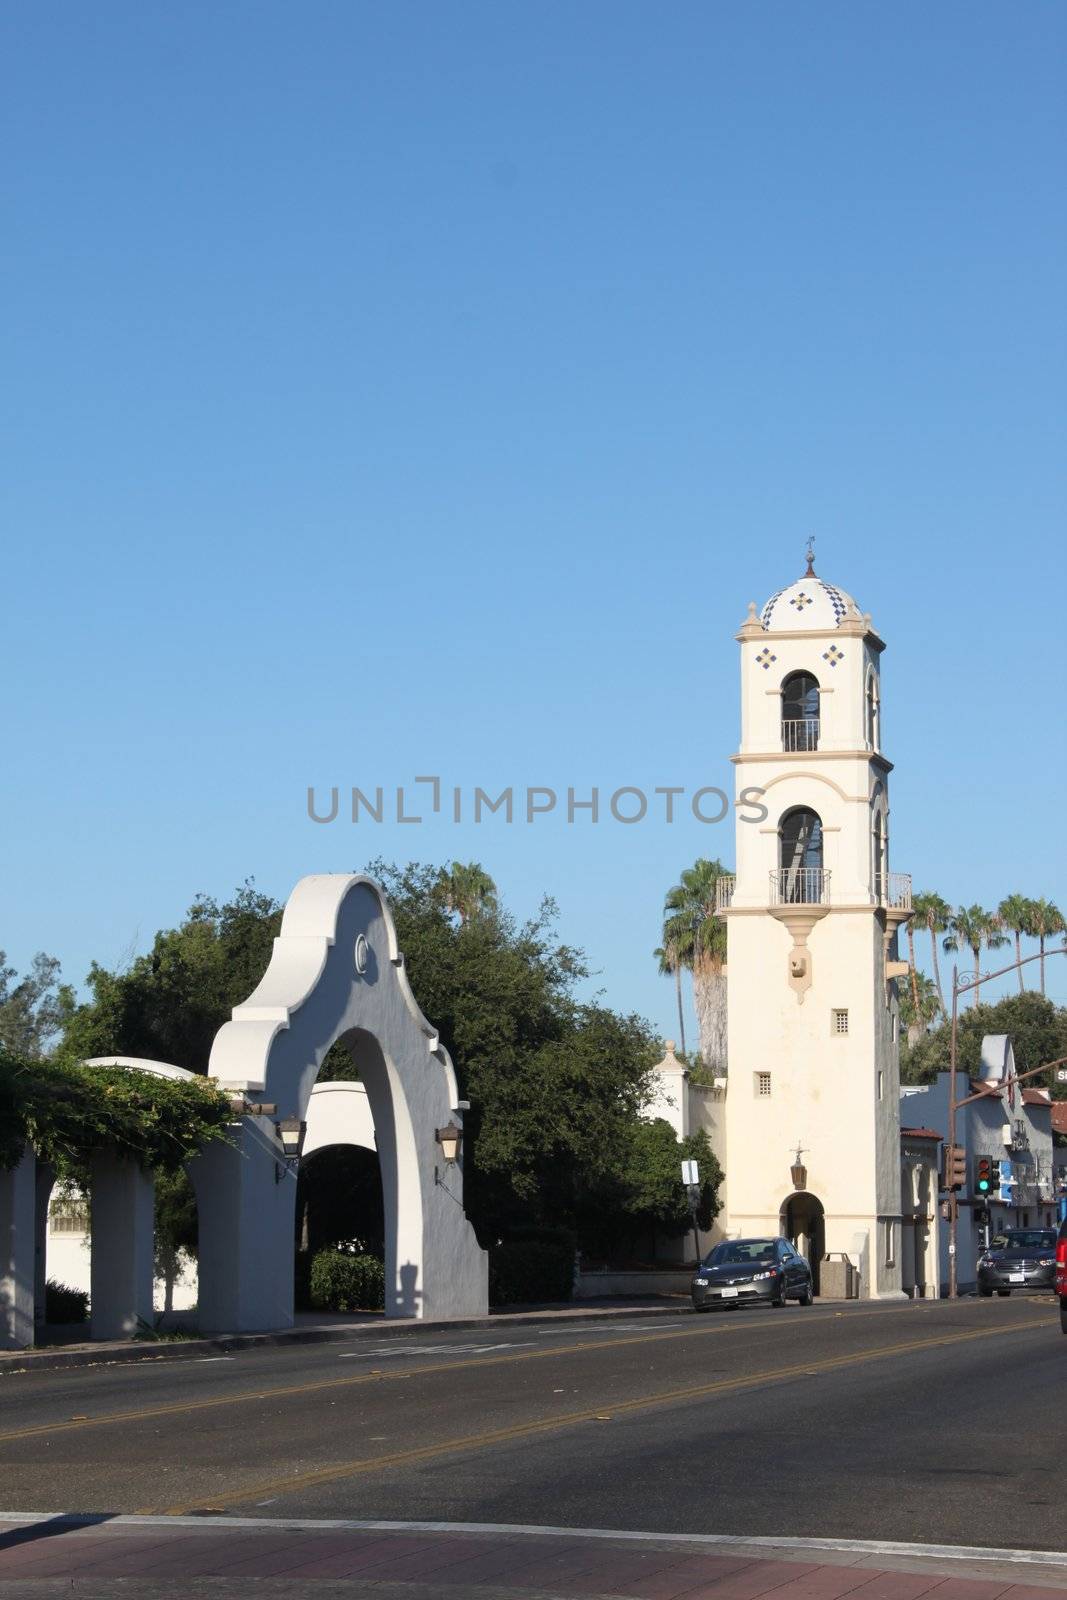 Downtown Ojai with the post office tower.